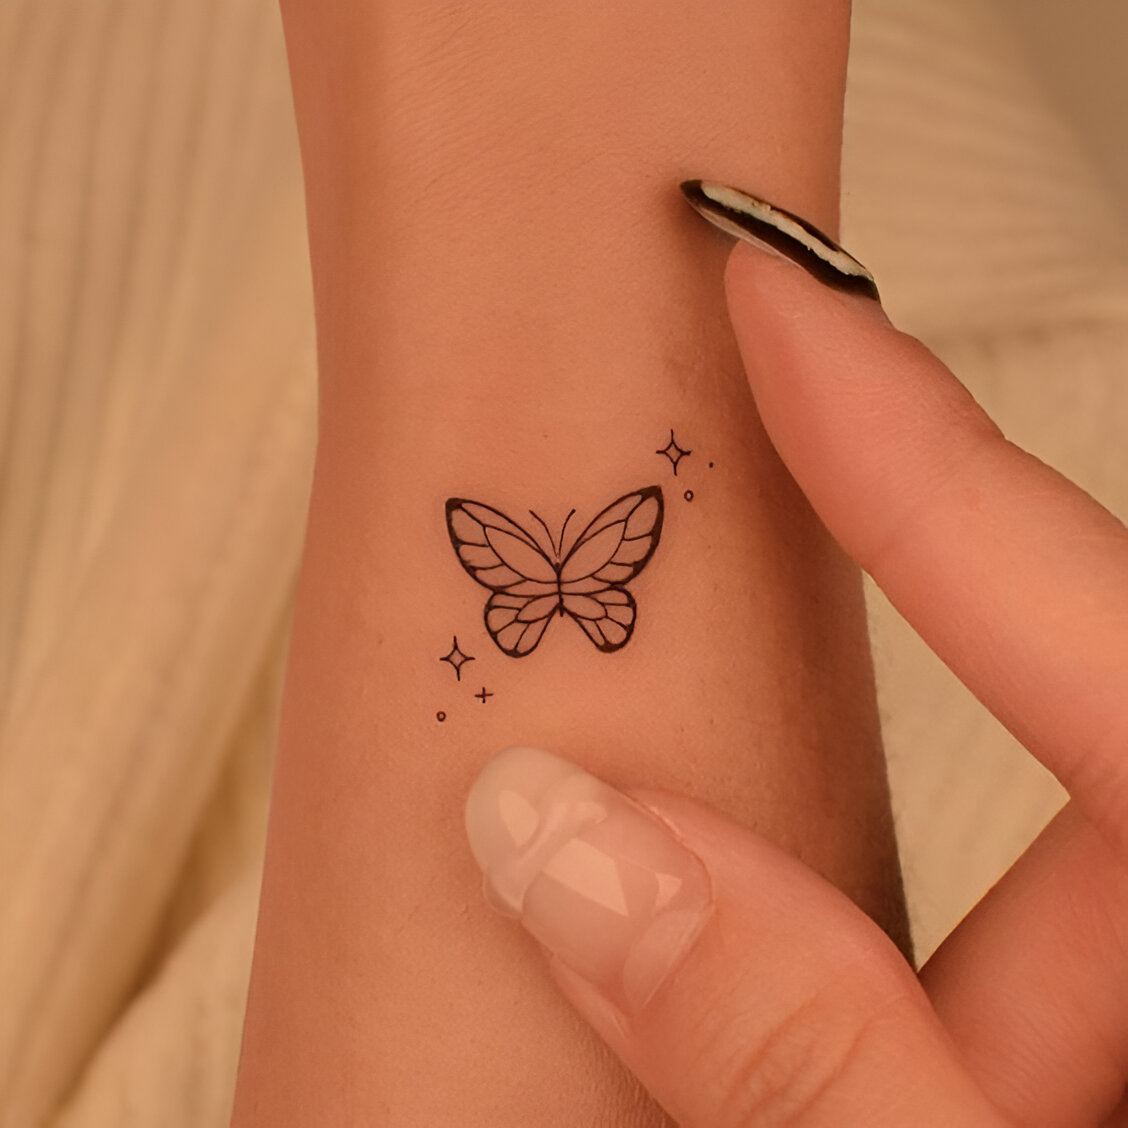 Simple Wrist Tattoos With Butterfly Design